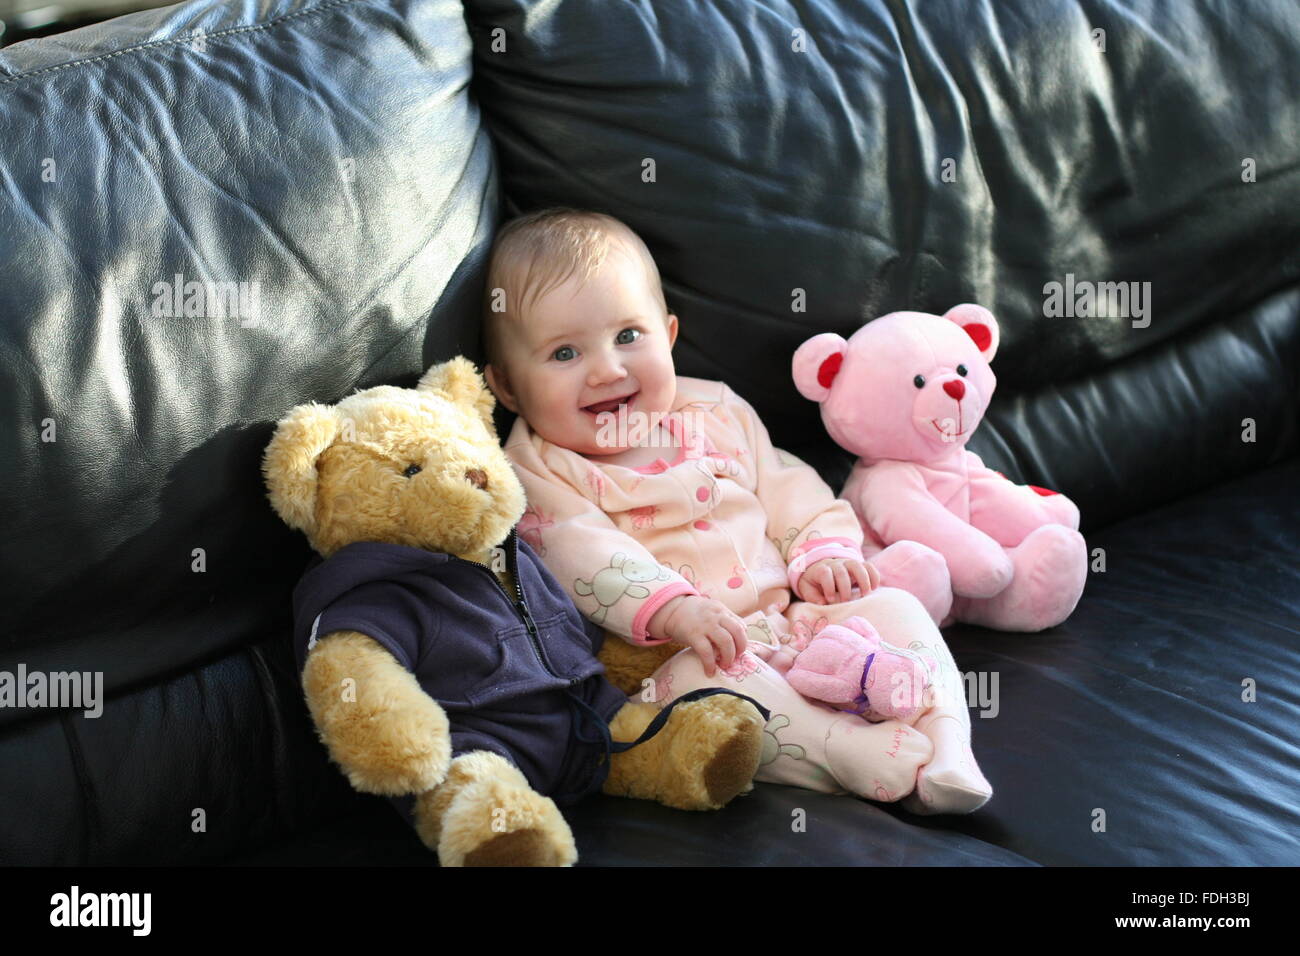 Baby girl child, kid laughing out loud with her teddy, family time, family happy joyful innocent childhood concept Stock Photo